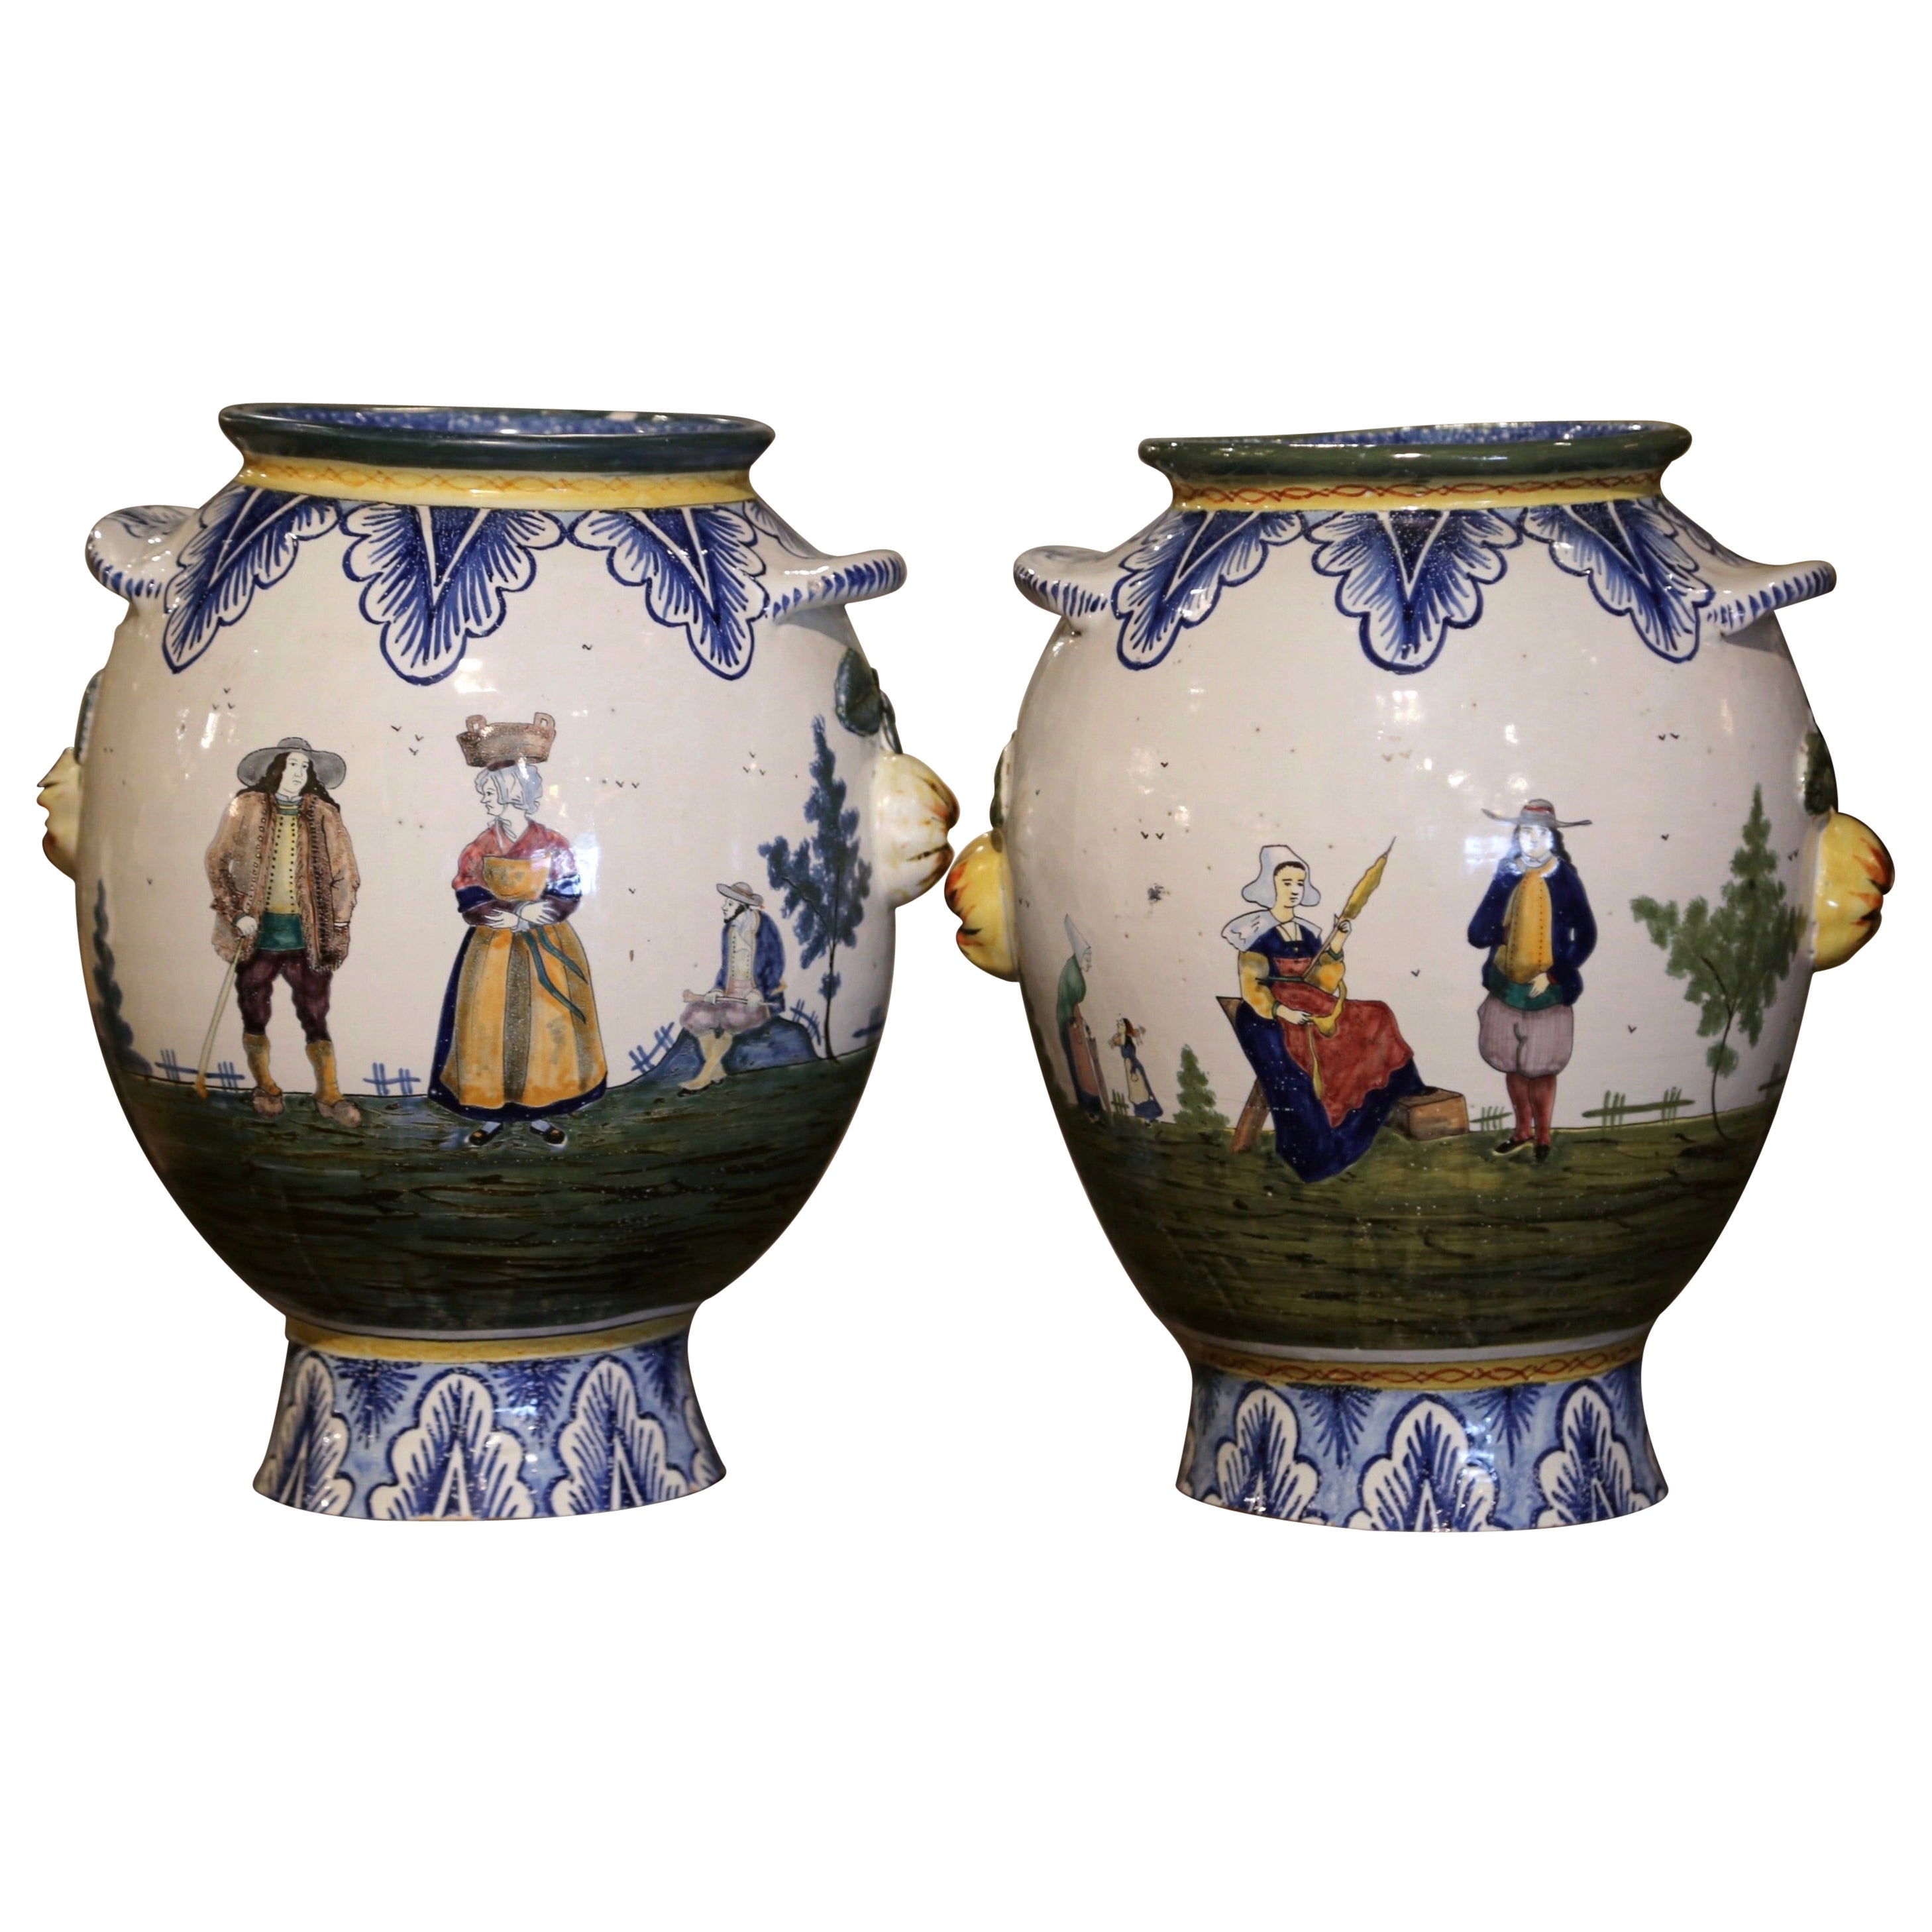 Henriot Quimper Delft and Faience